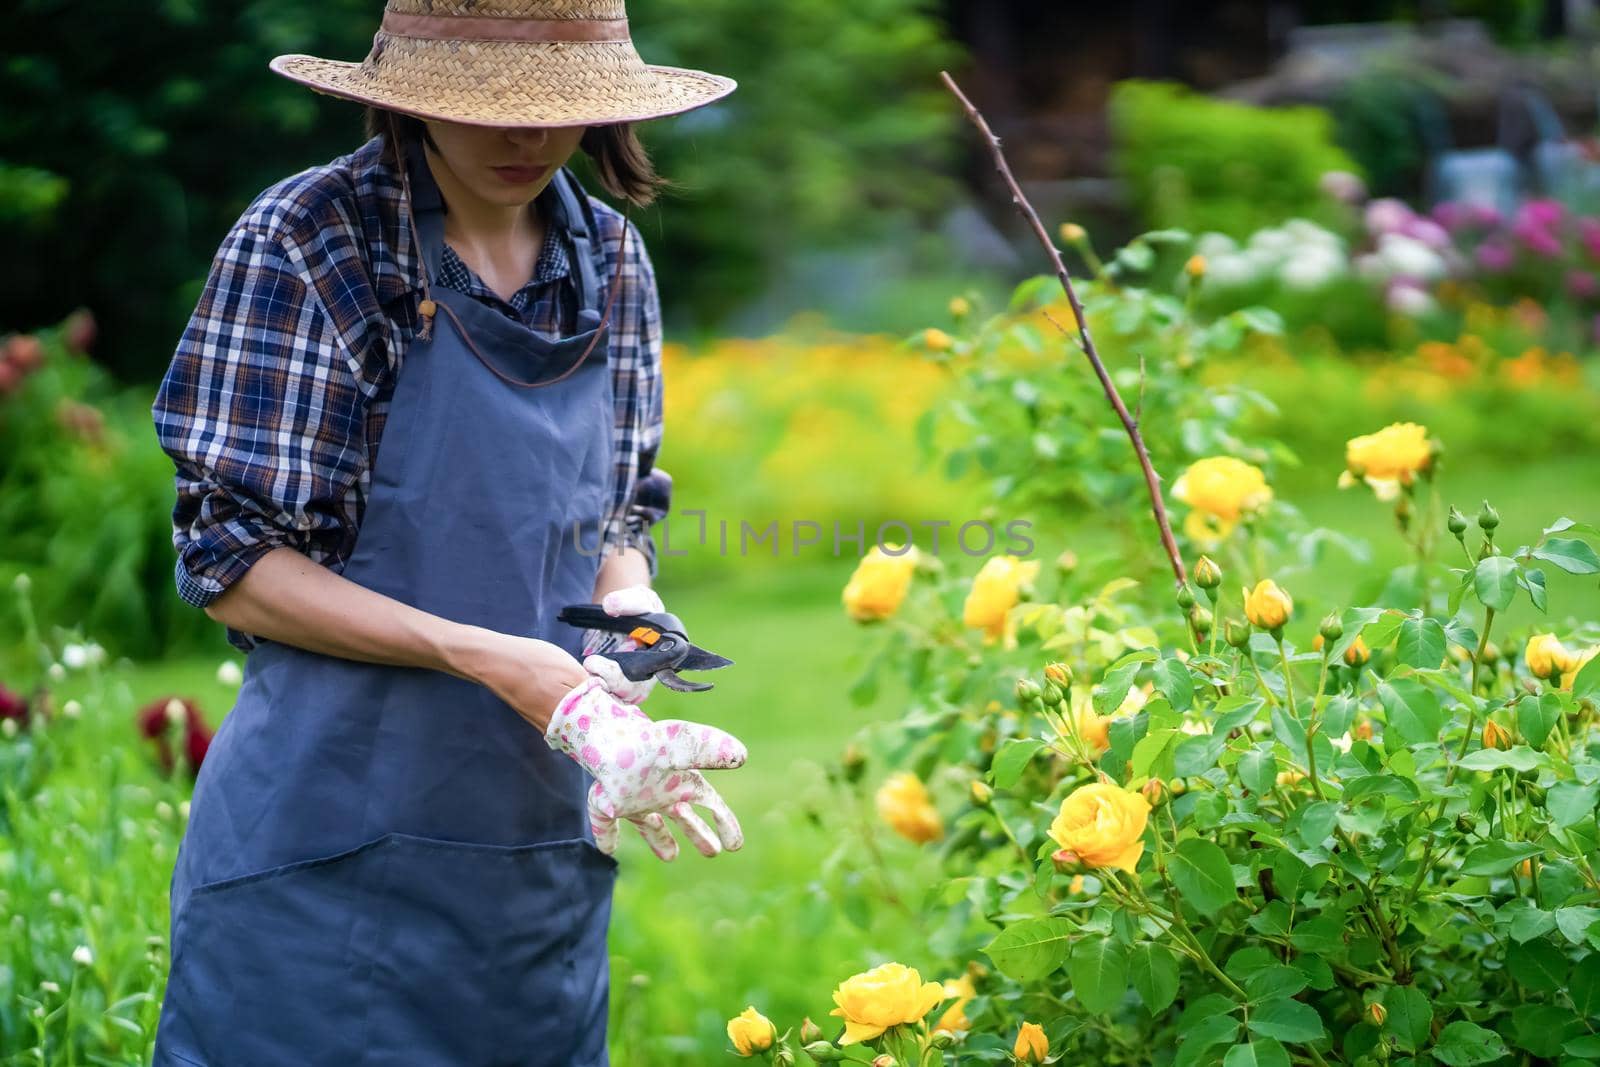 A woman is involved in gardening and farming, a gardener in a straw hat, an apron and a plaid shirt with a pruner cuts a branch of a lush bush with yellow roses in the garden on a sunny day.